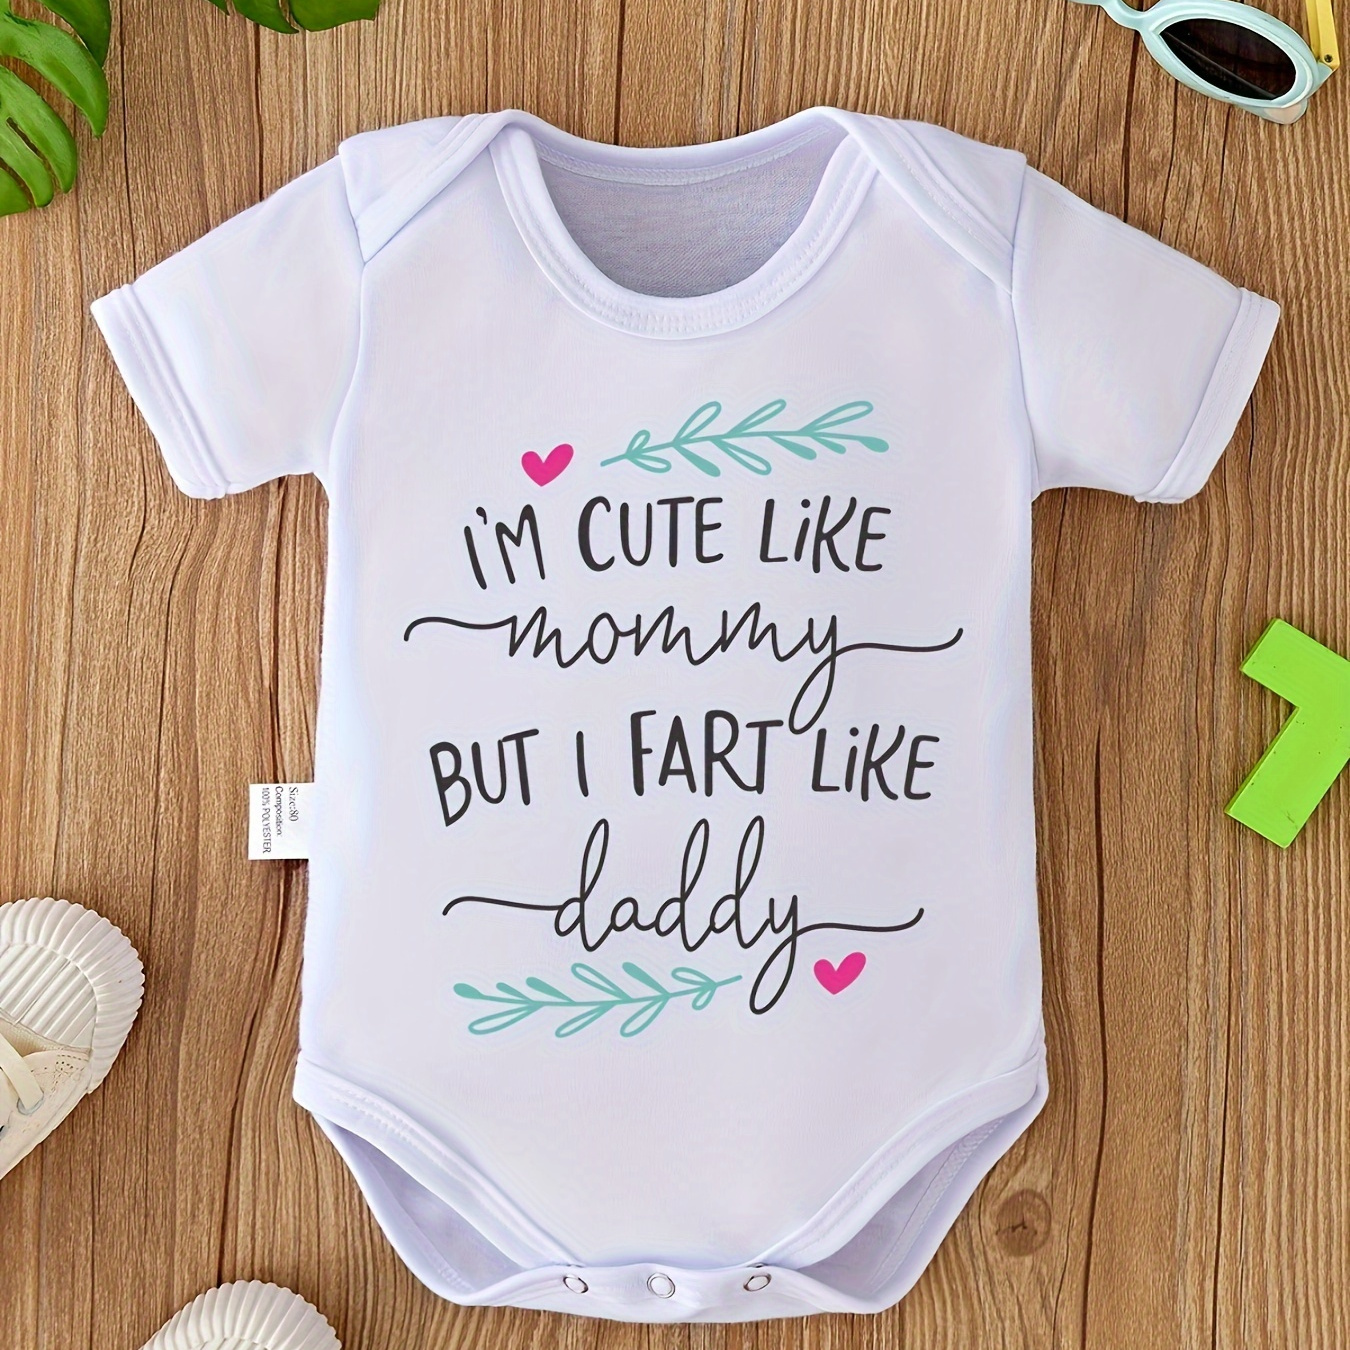 

I'm Cute Like Mommy But I Fart Like Daddy " Funny Letter Printed Baby Girls Triangle Romper Newborn Romper Onesie Soft And Comfortable Pregnancy Gift